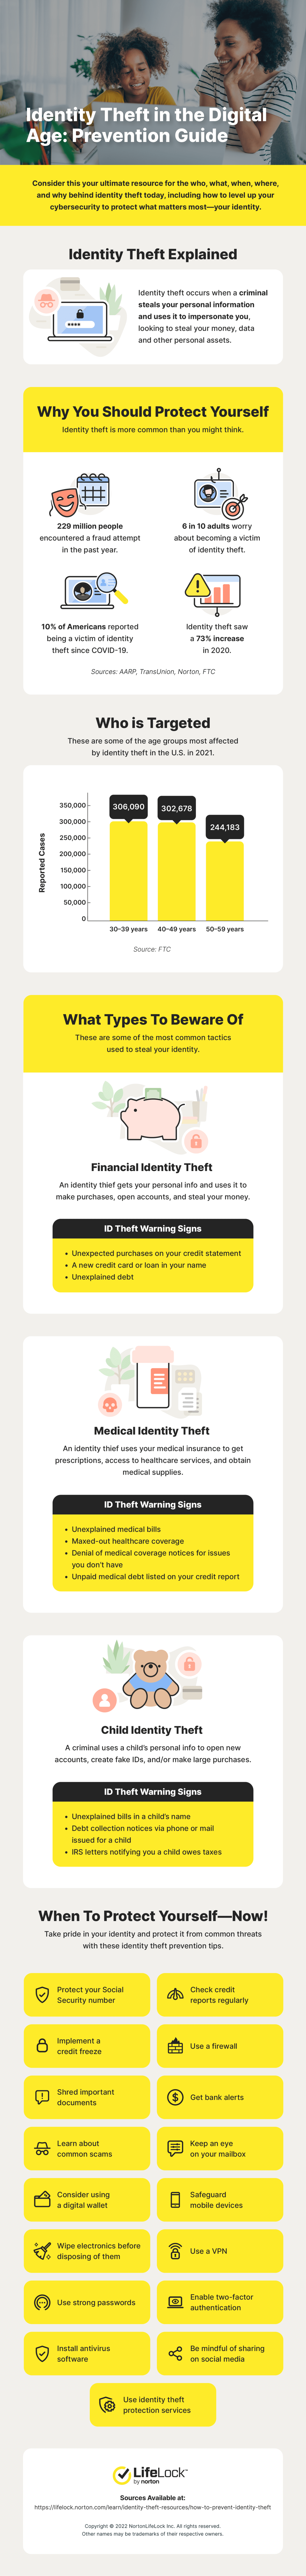 An infographic showcases different types of identity theft and tips for learning how to prevent identity theft.